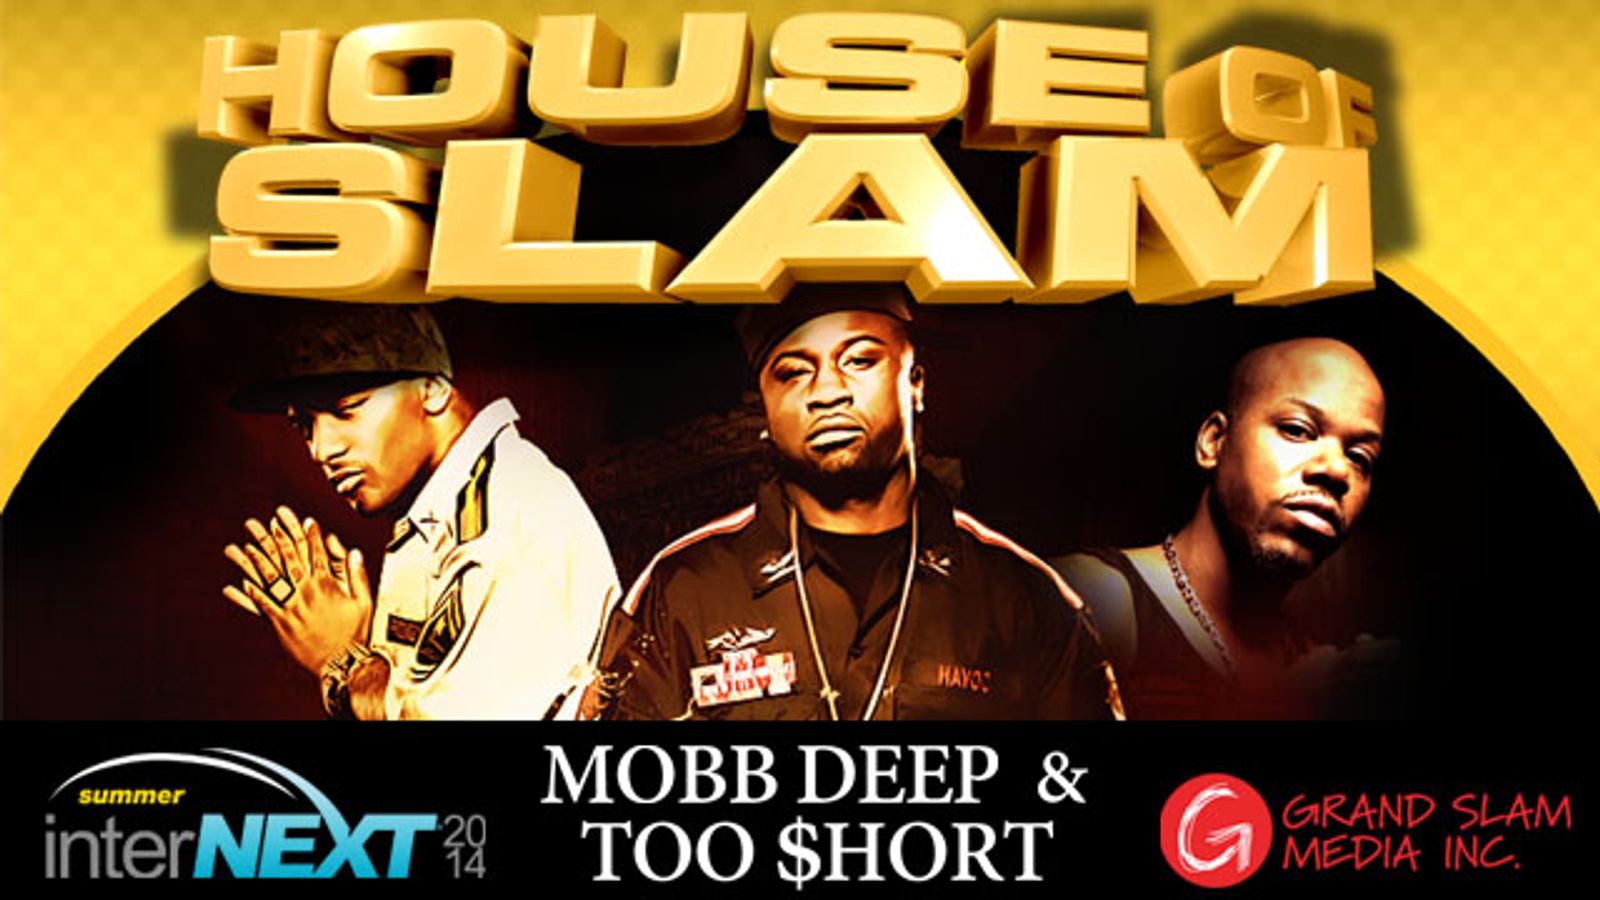 Grand Slam Media Plans 'House of Slam' Party at Internext NO